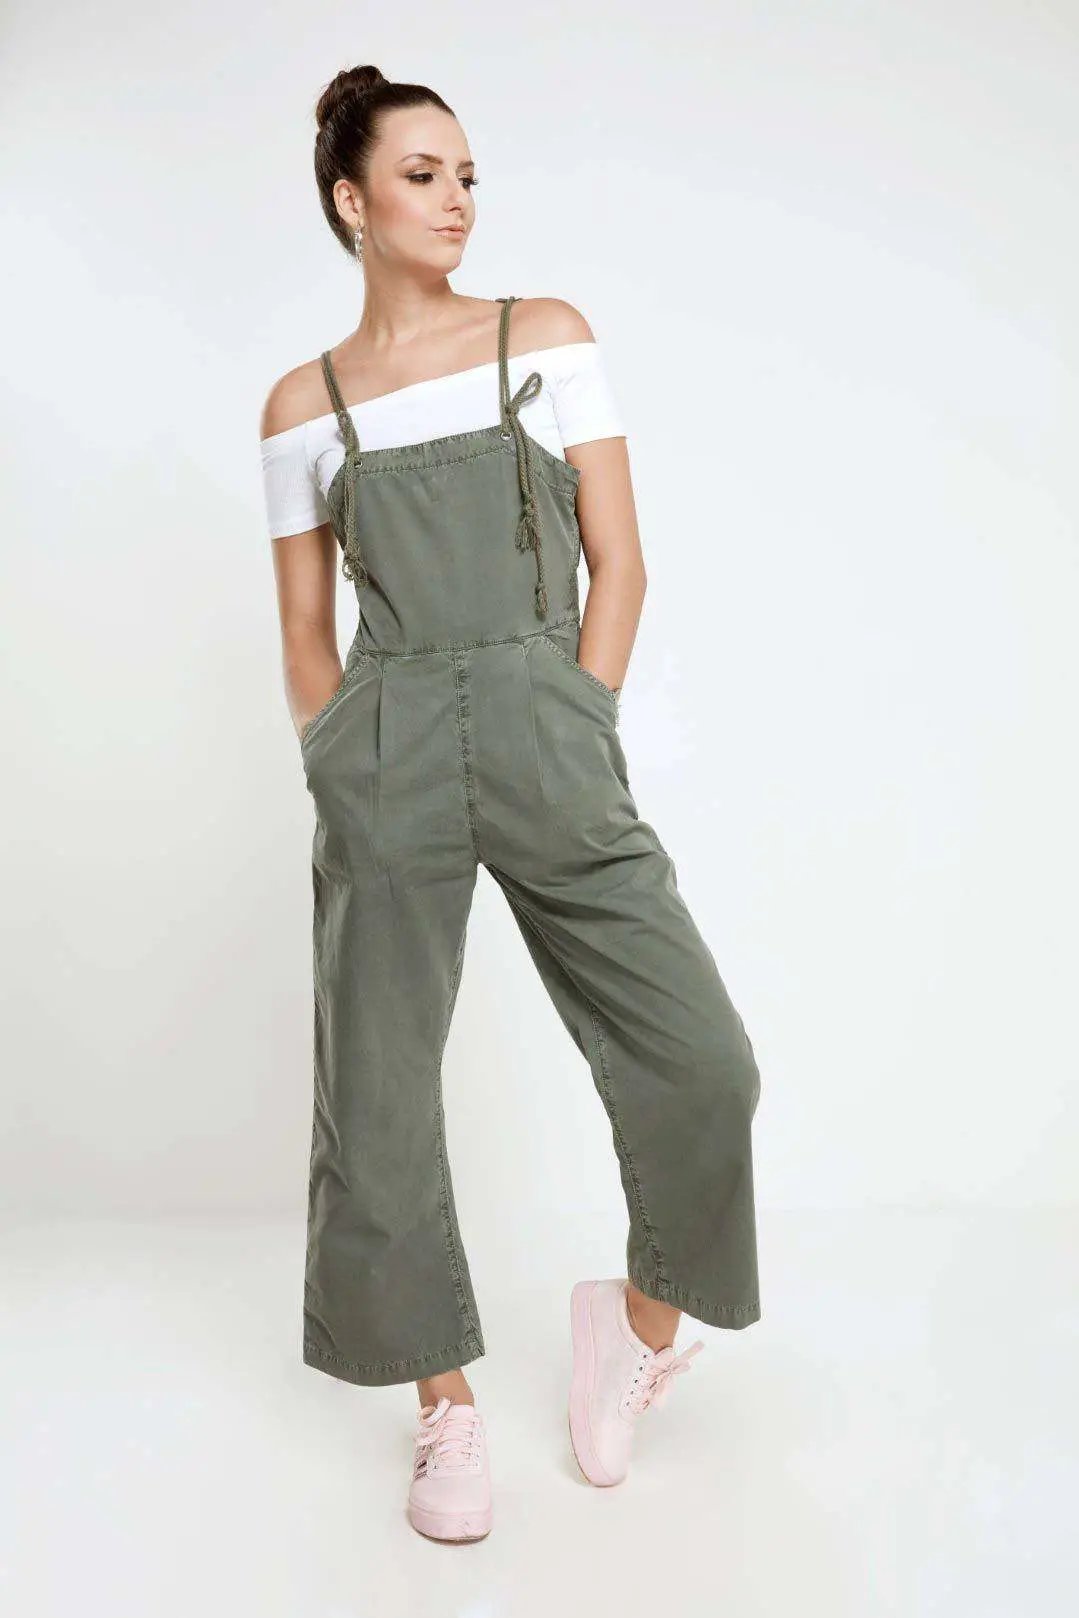 Strappy dungaree in olive